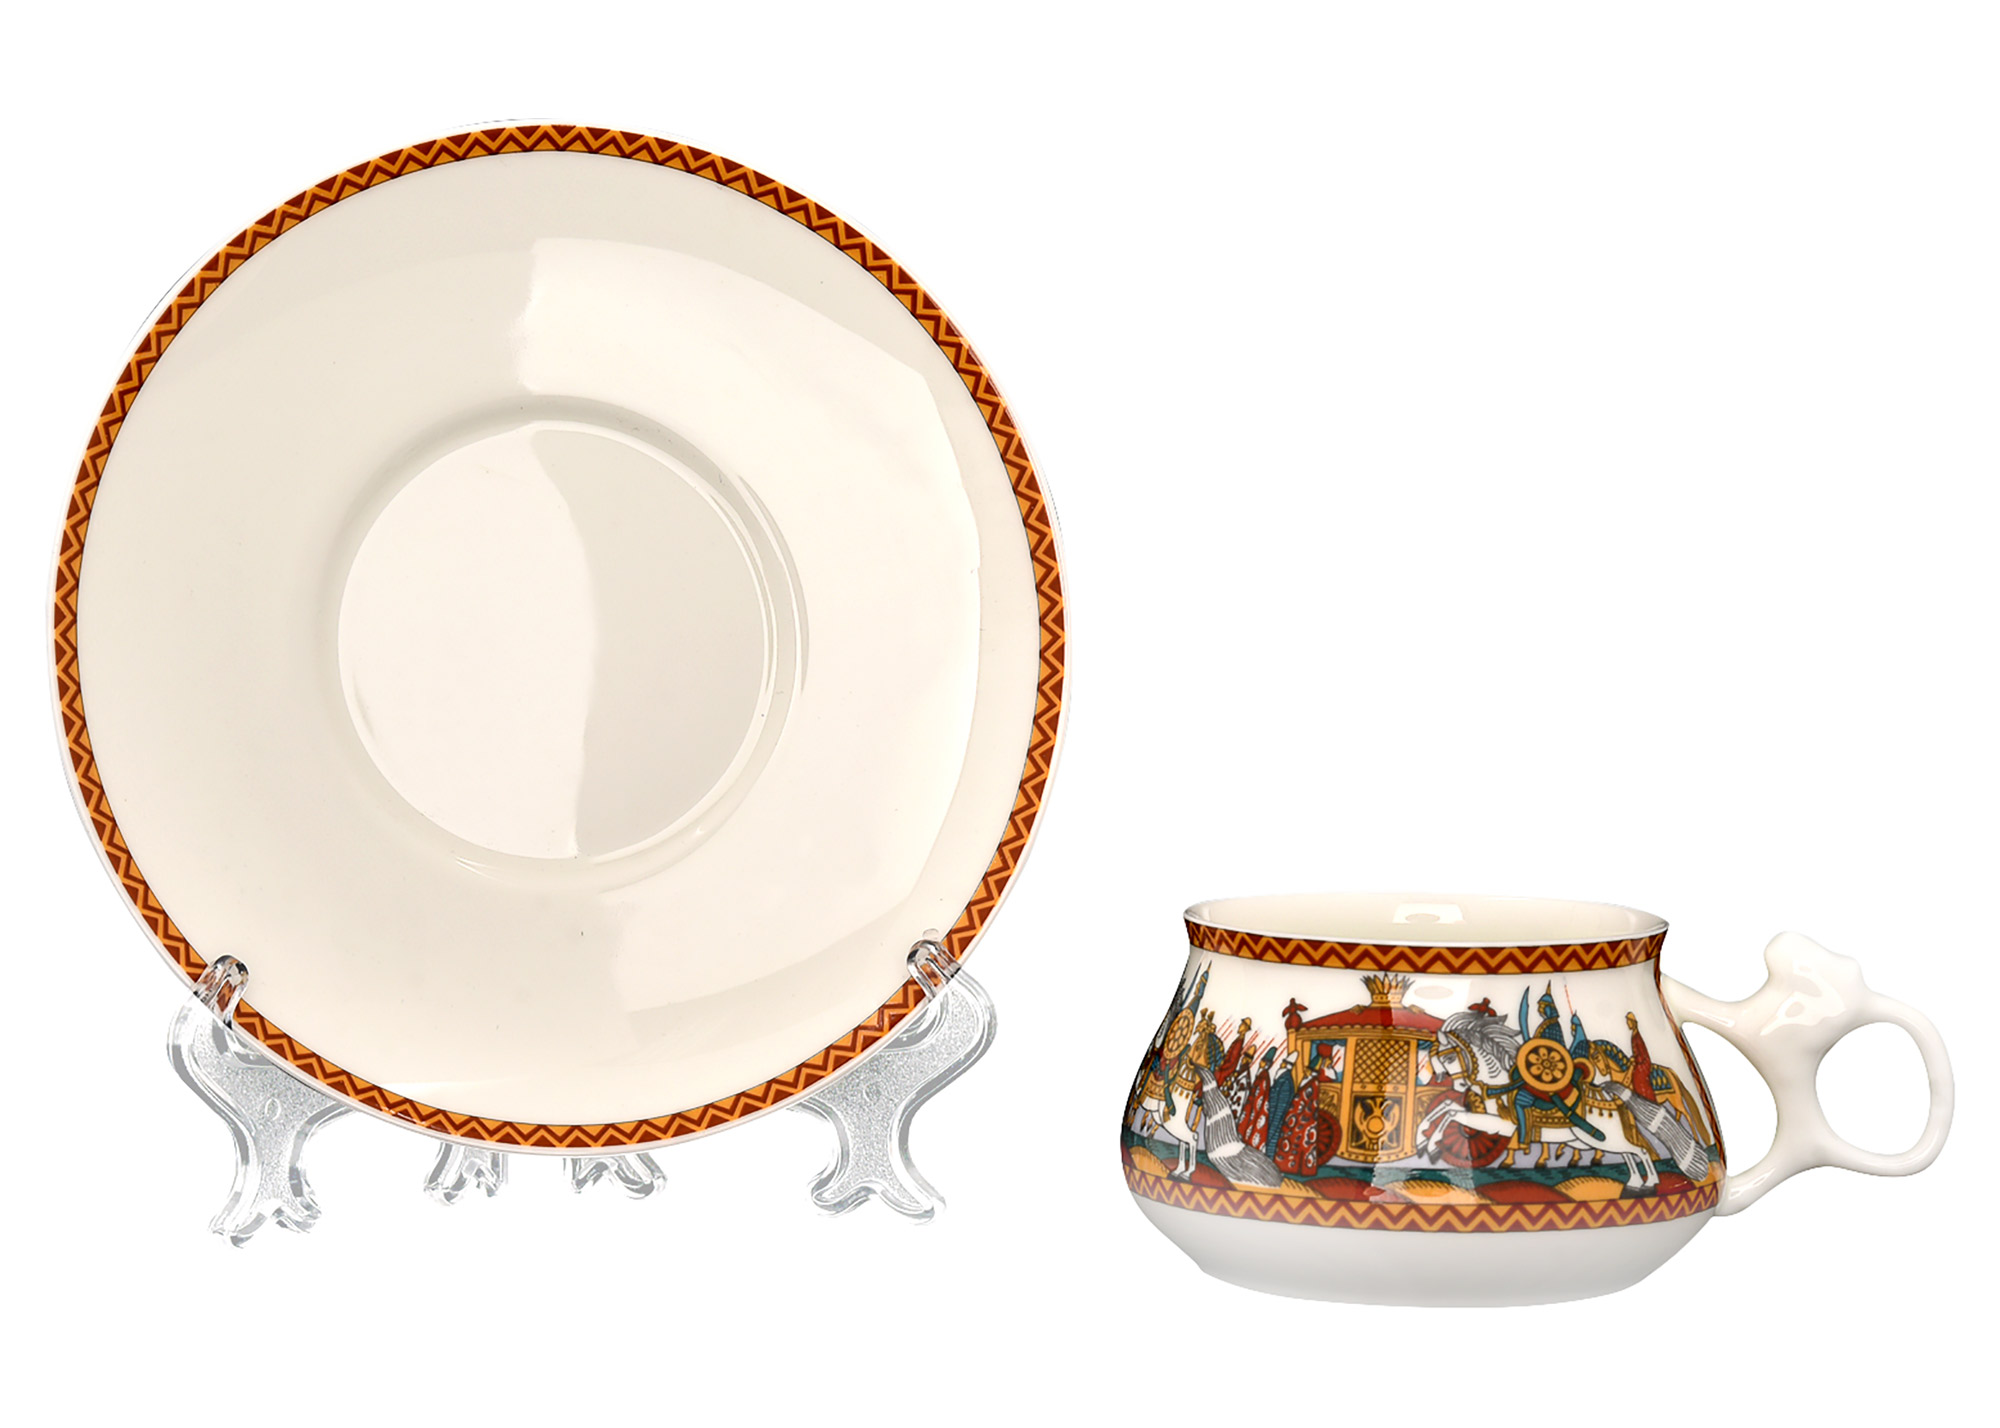 Buy Tsar Dadon's Army (from Tale of the Golden Cockerel) Bone China Cup and Saucer at GoldenCockerel.com